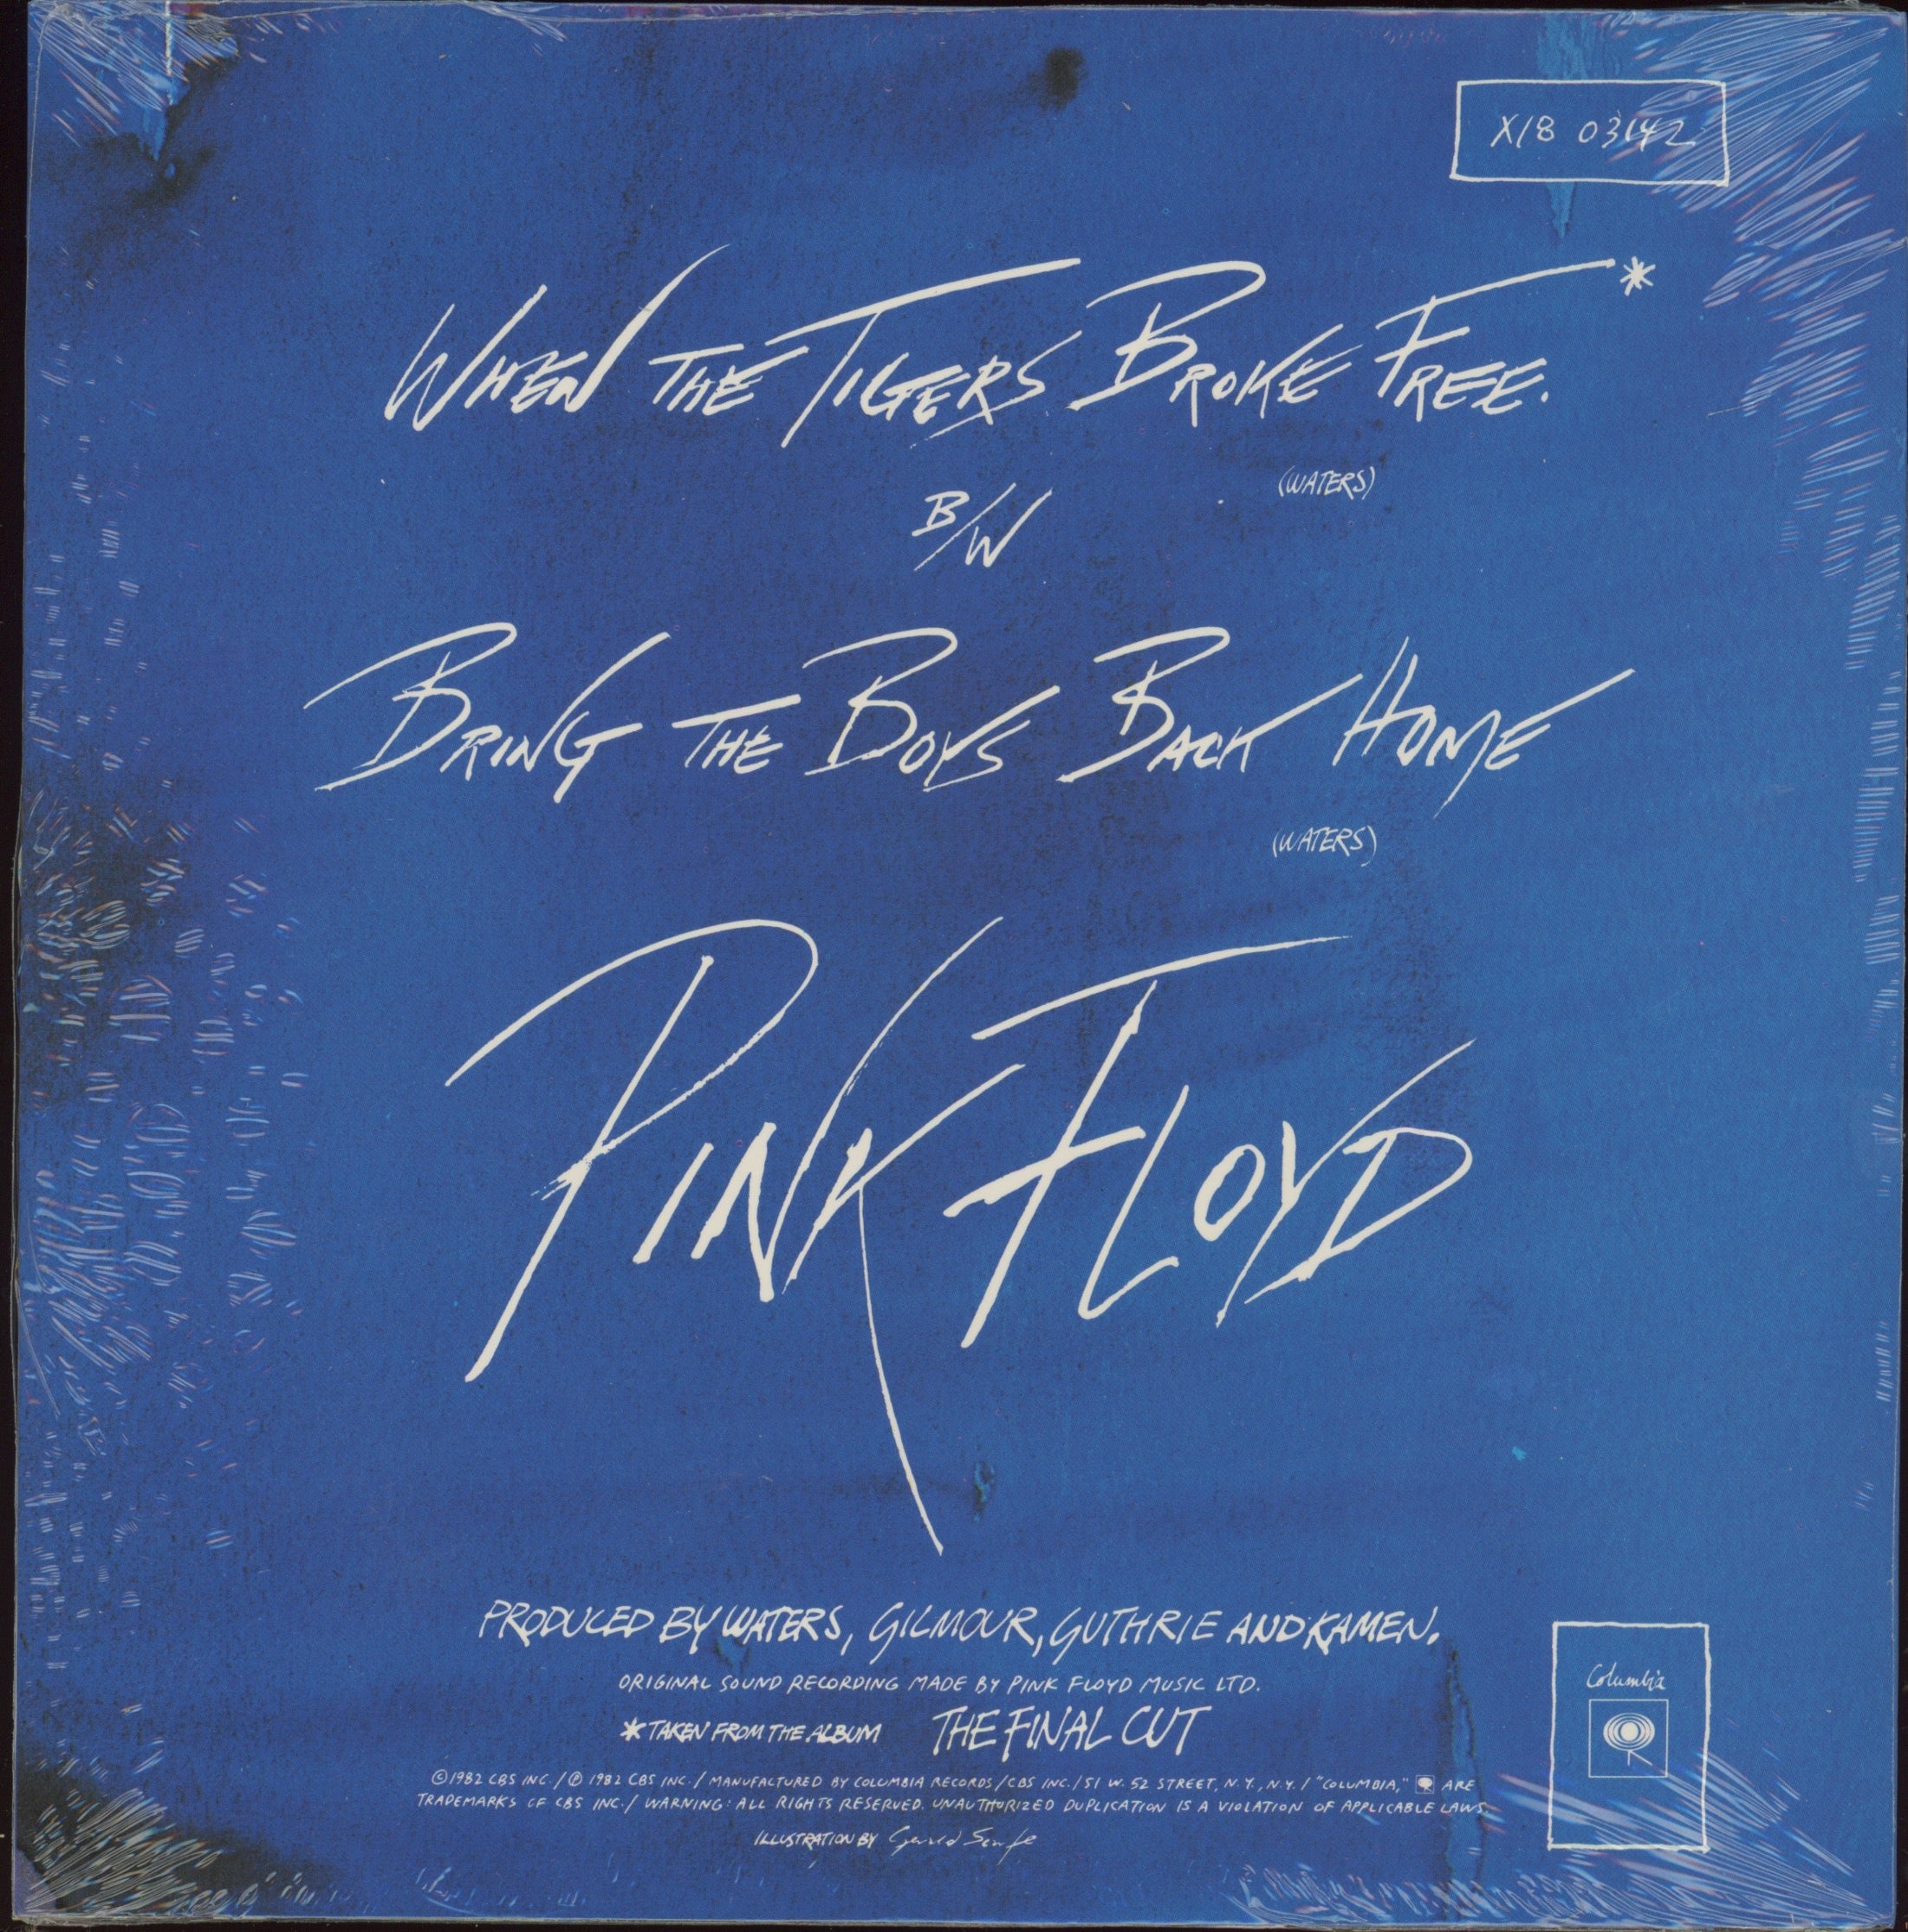 Pink Floyd - The Wall (Music From The Film) on Columbia Limited Collector's Package With Photos Sealed